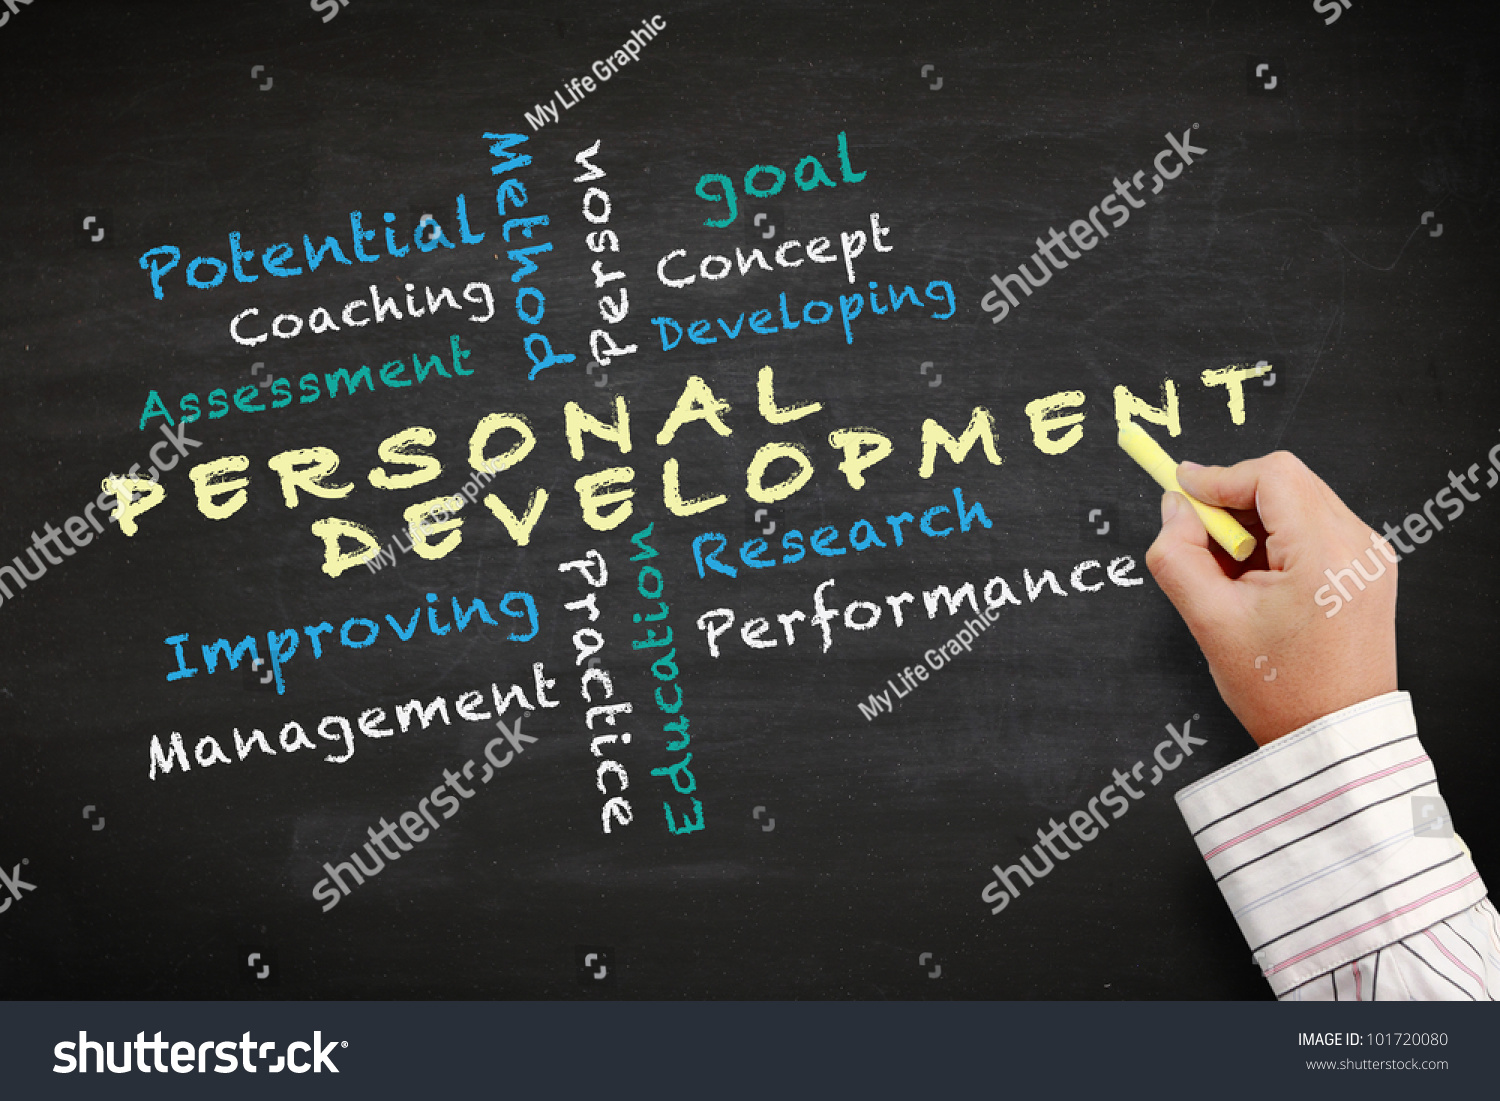 Personal Development Concept Other Related Words Stock Illustration ...